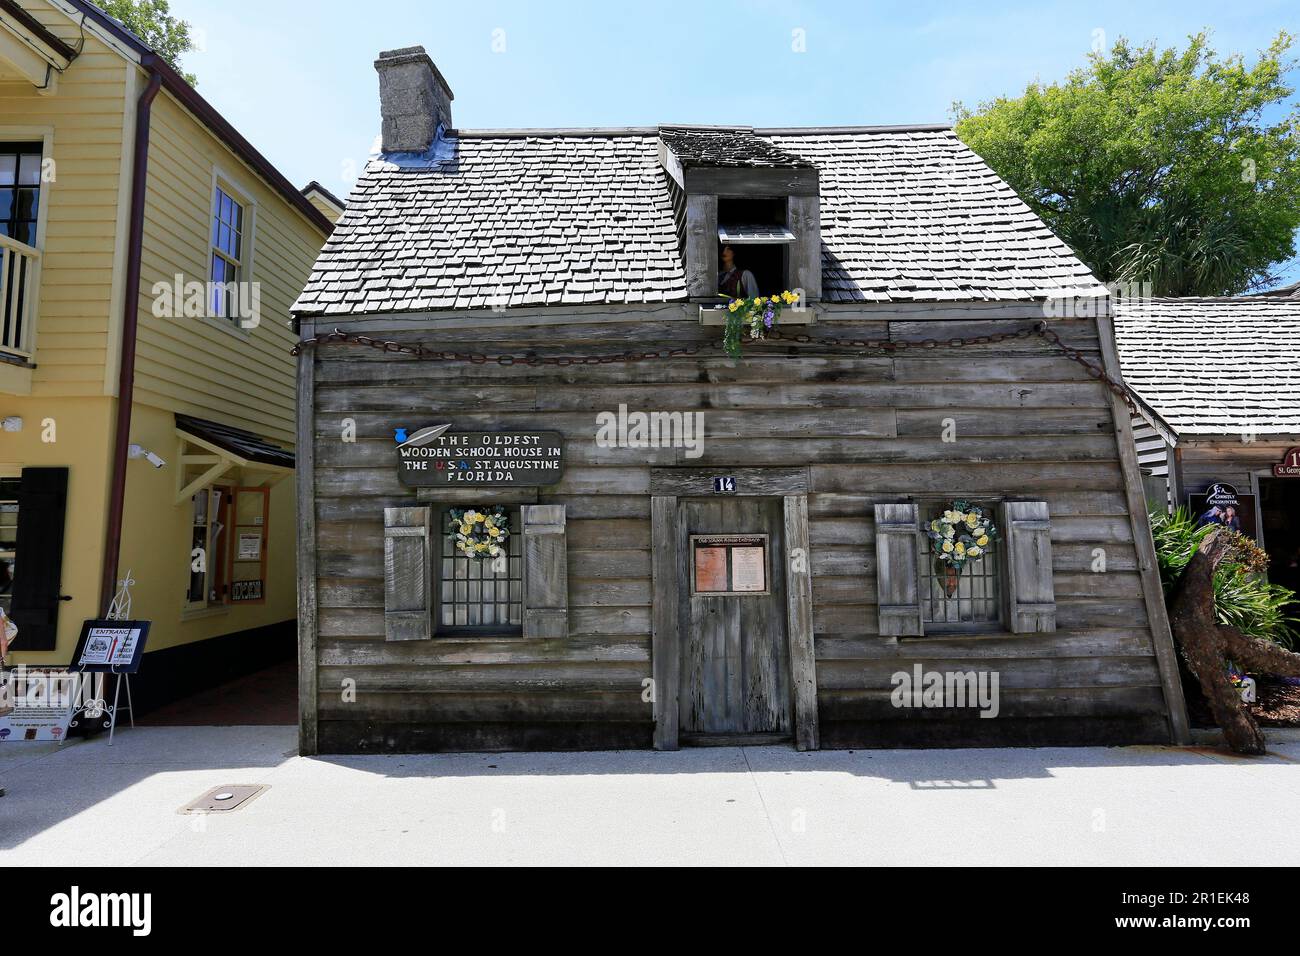 oldest wooden school house in the united states, city, st. augustine, st augustine, saint augustine, florida, usa, us, america, american, 2023 update, Stock Photo